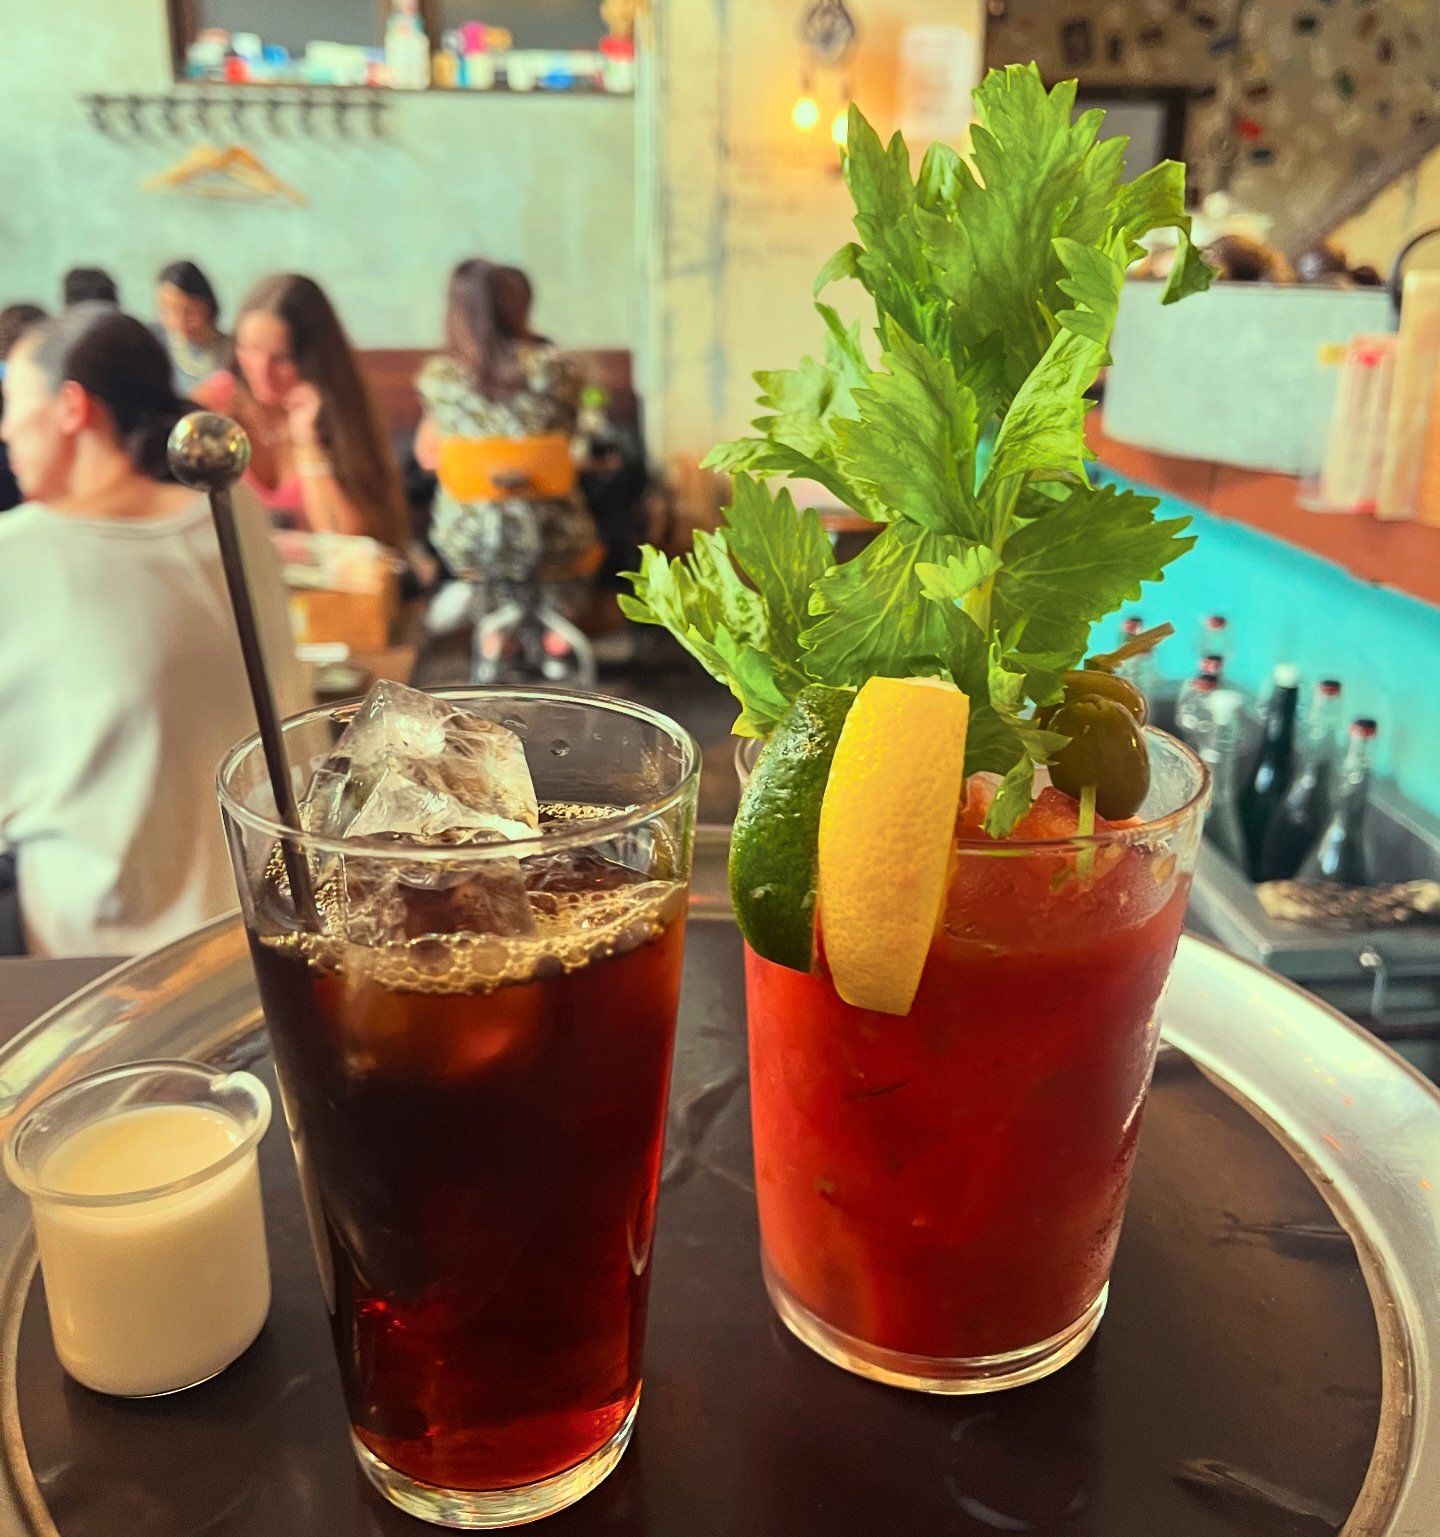 You need Bloody Mary🍅🫒🍅🍹😎

➕Coffee🖤

#asakusa  #suke6diner #morning  #breakfast #brunch  #lunch #omlete #diner #cafe #pastry #coffee #gourmet #bread #bloodymary #drink #cocktails #beer #snacks #bar 
#tokyo #tokyogourmet #tourist #Japan #eatgood